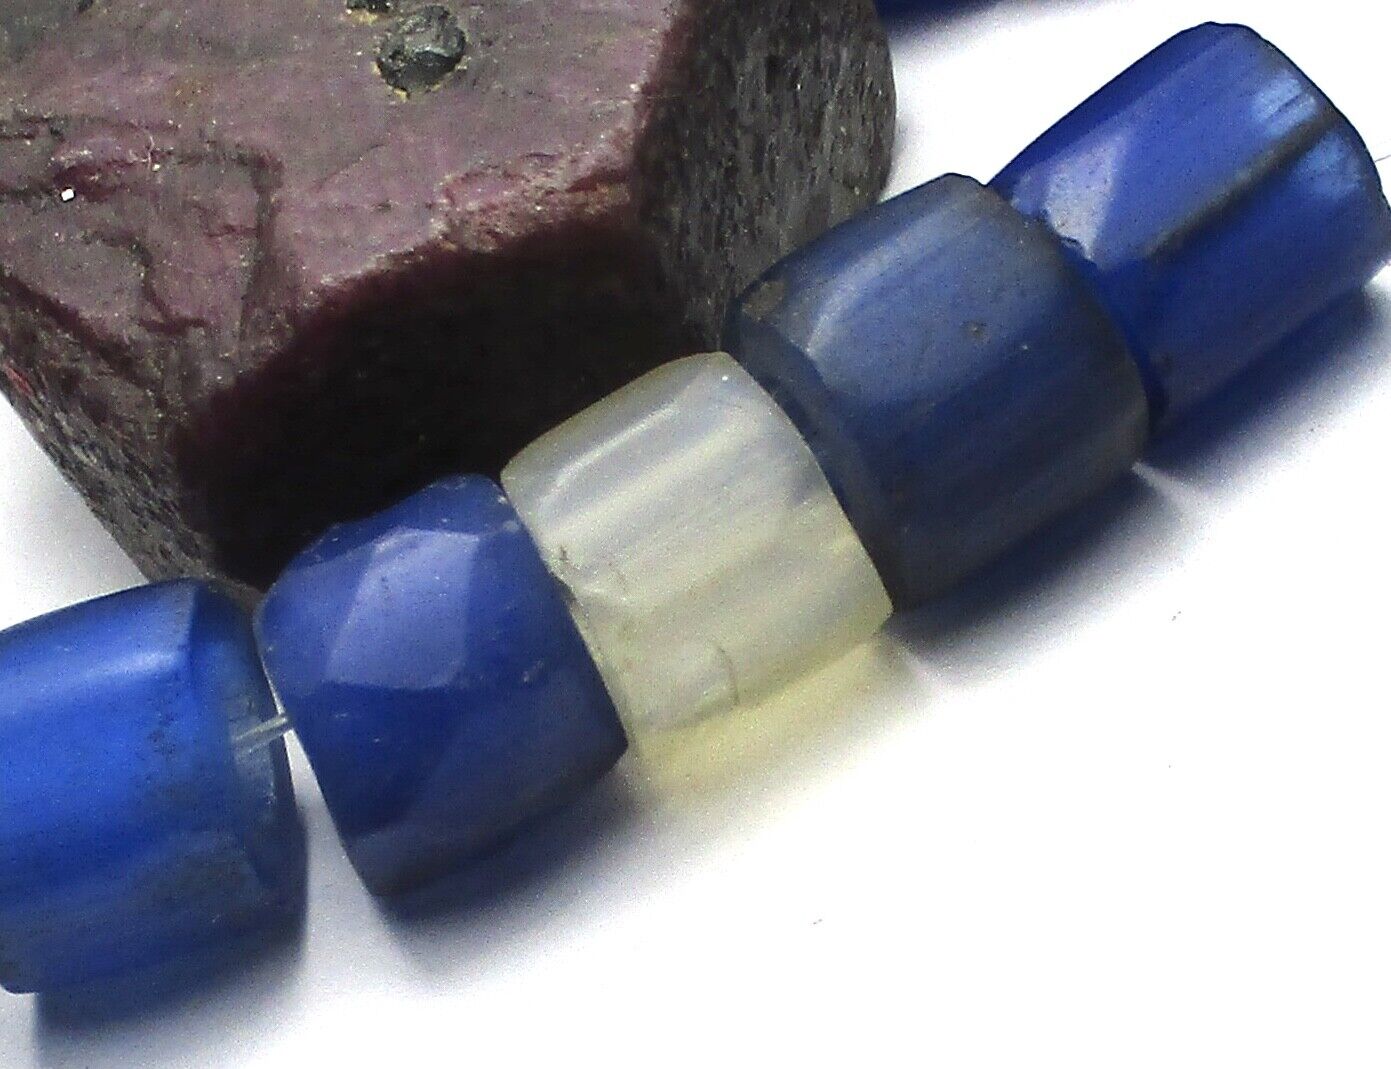 15 Rare Hand Faceted Old Amazing Graduated Russian Blue Antique Trade Beads